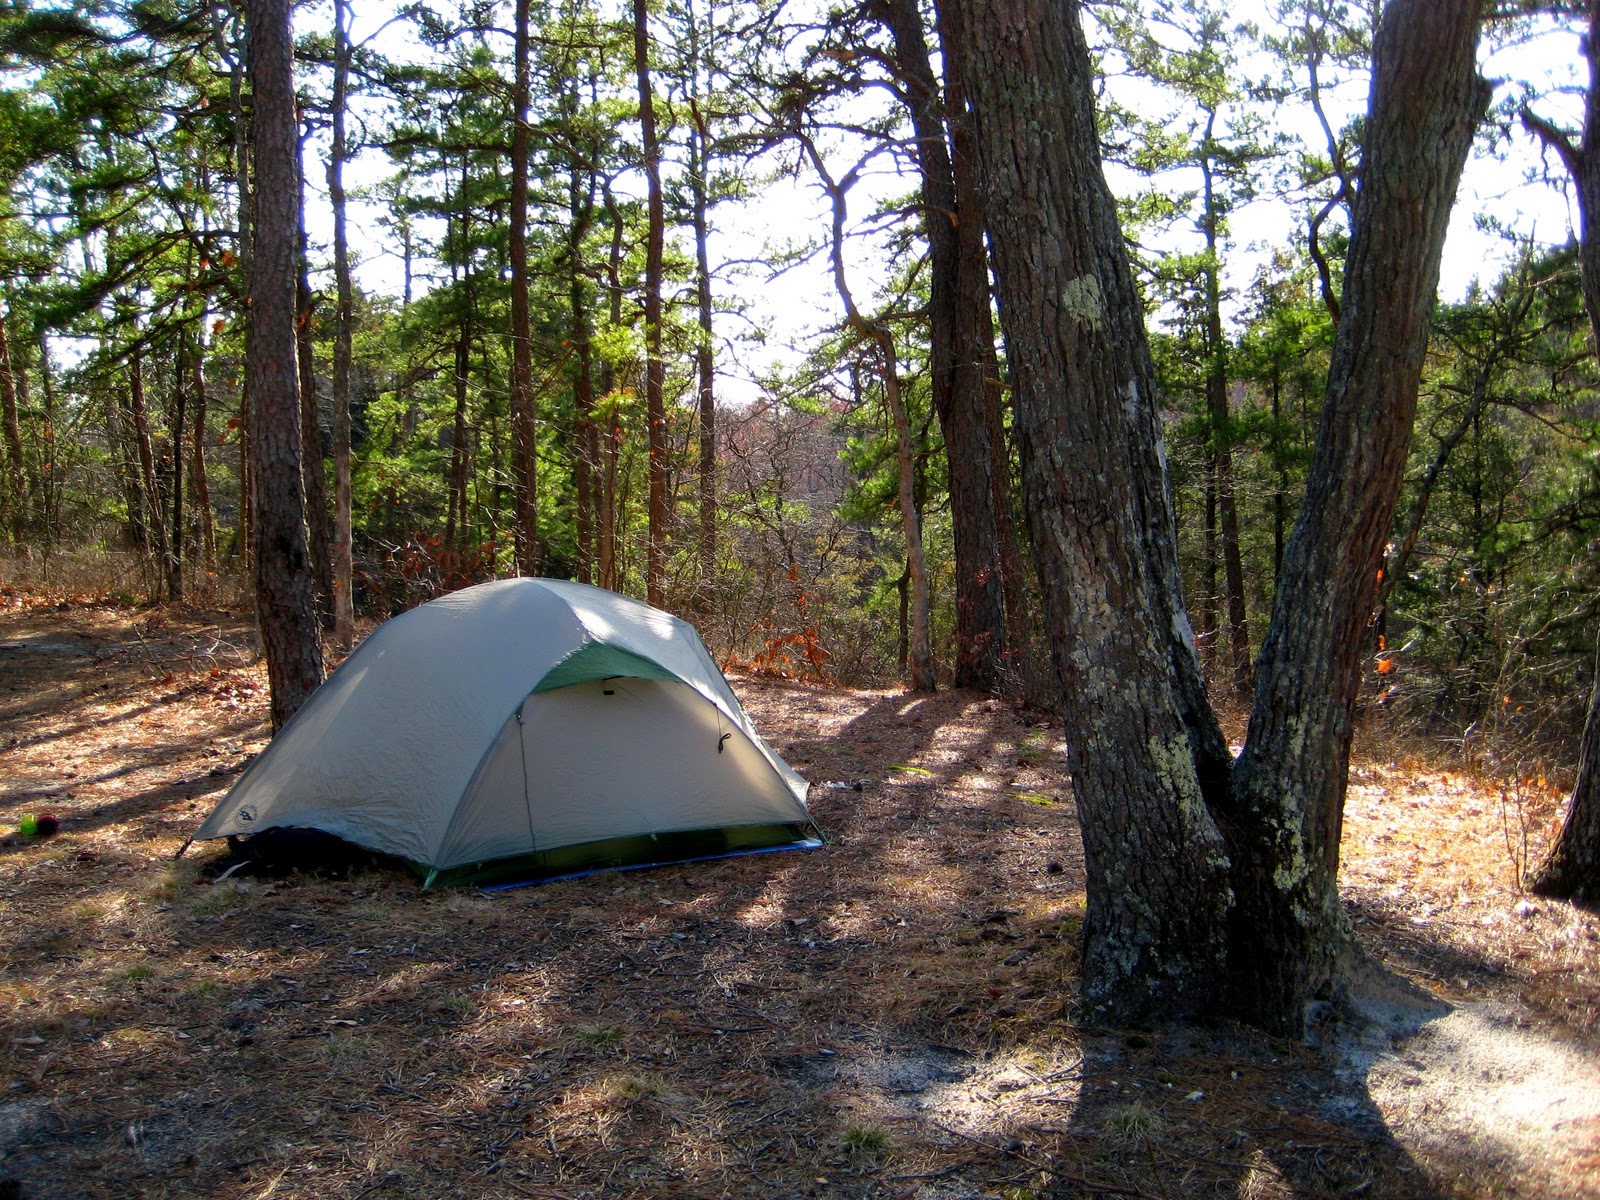 Camping Courtesy: Nine Behaviors to Avoid in Public Campgrounds